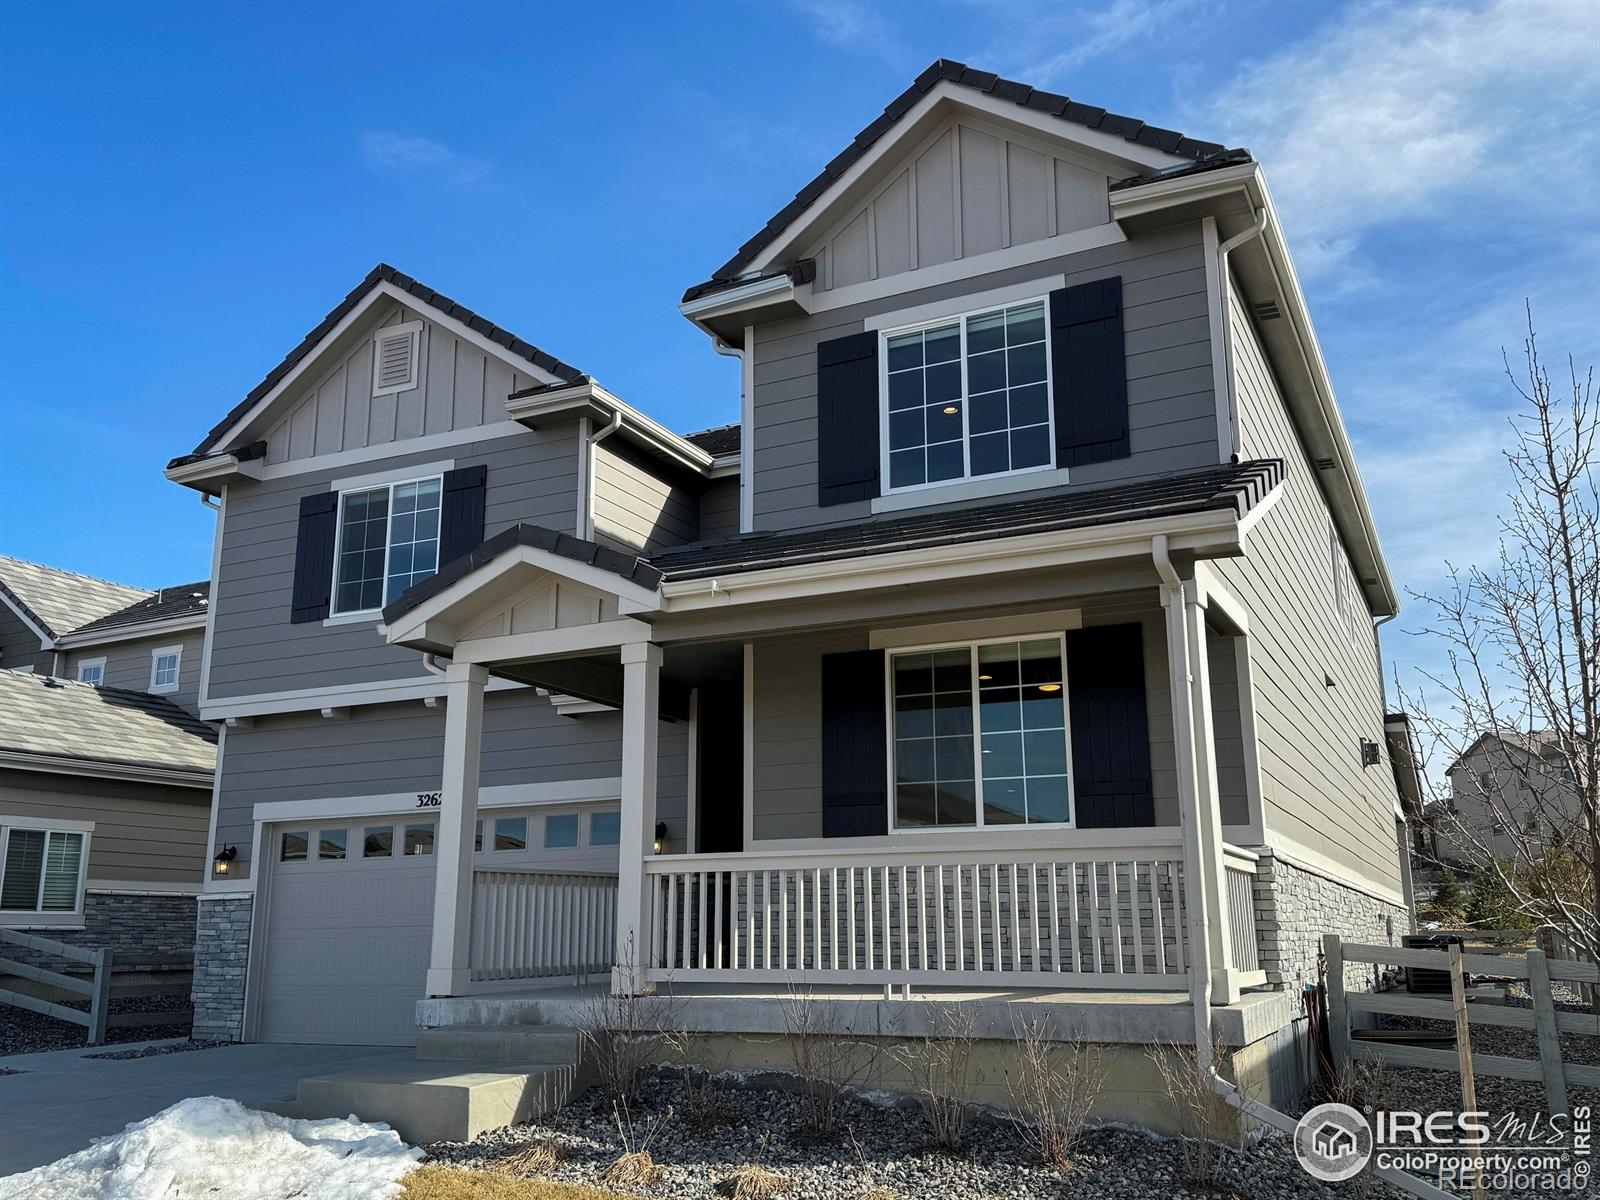 Report Image for 3262  Grizzly Peak Drive,Broomfield, Colorado